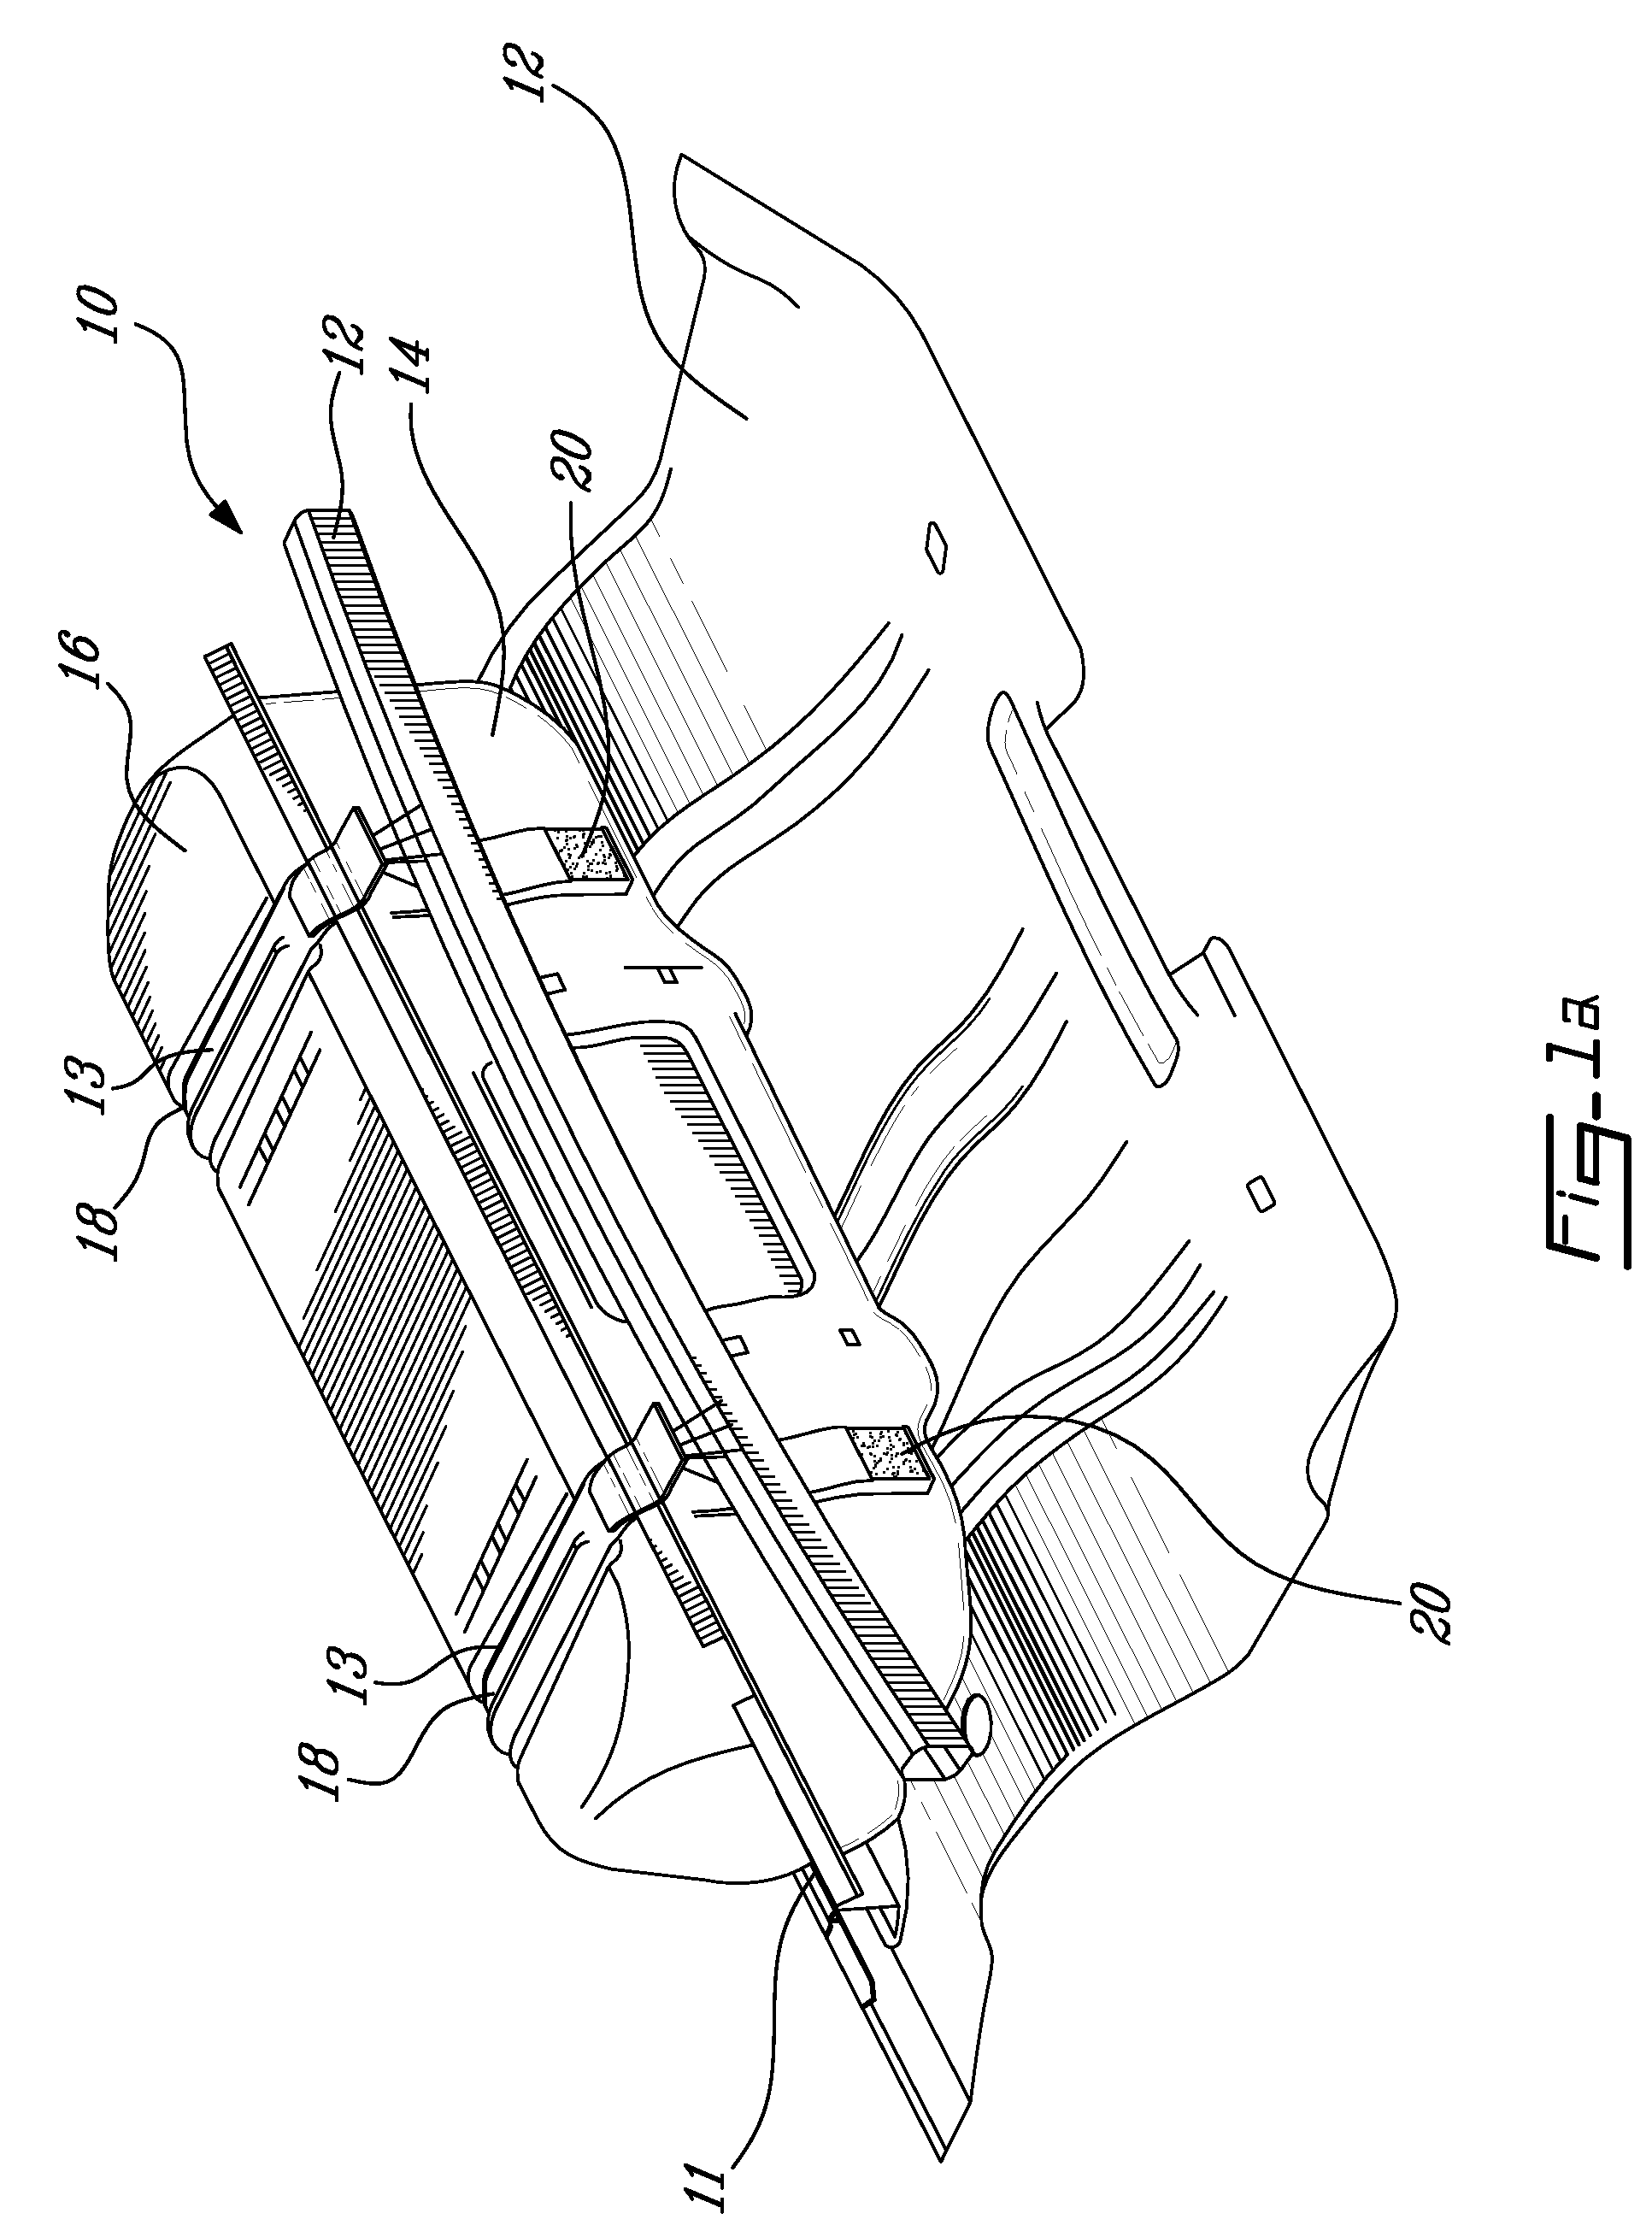 Fuel tank shell with structural support